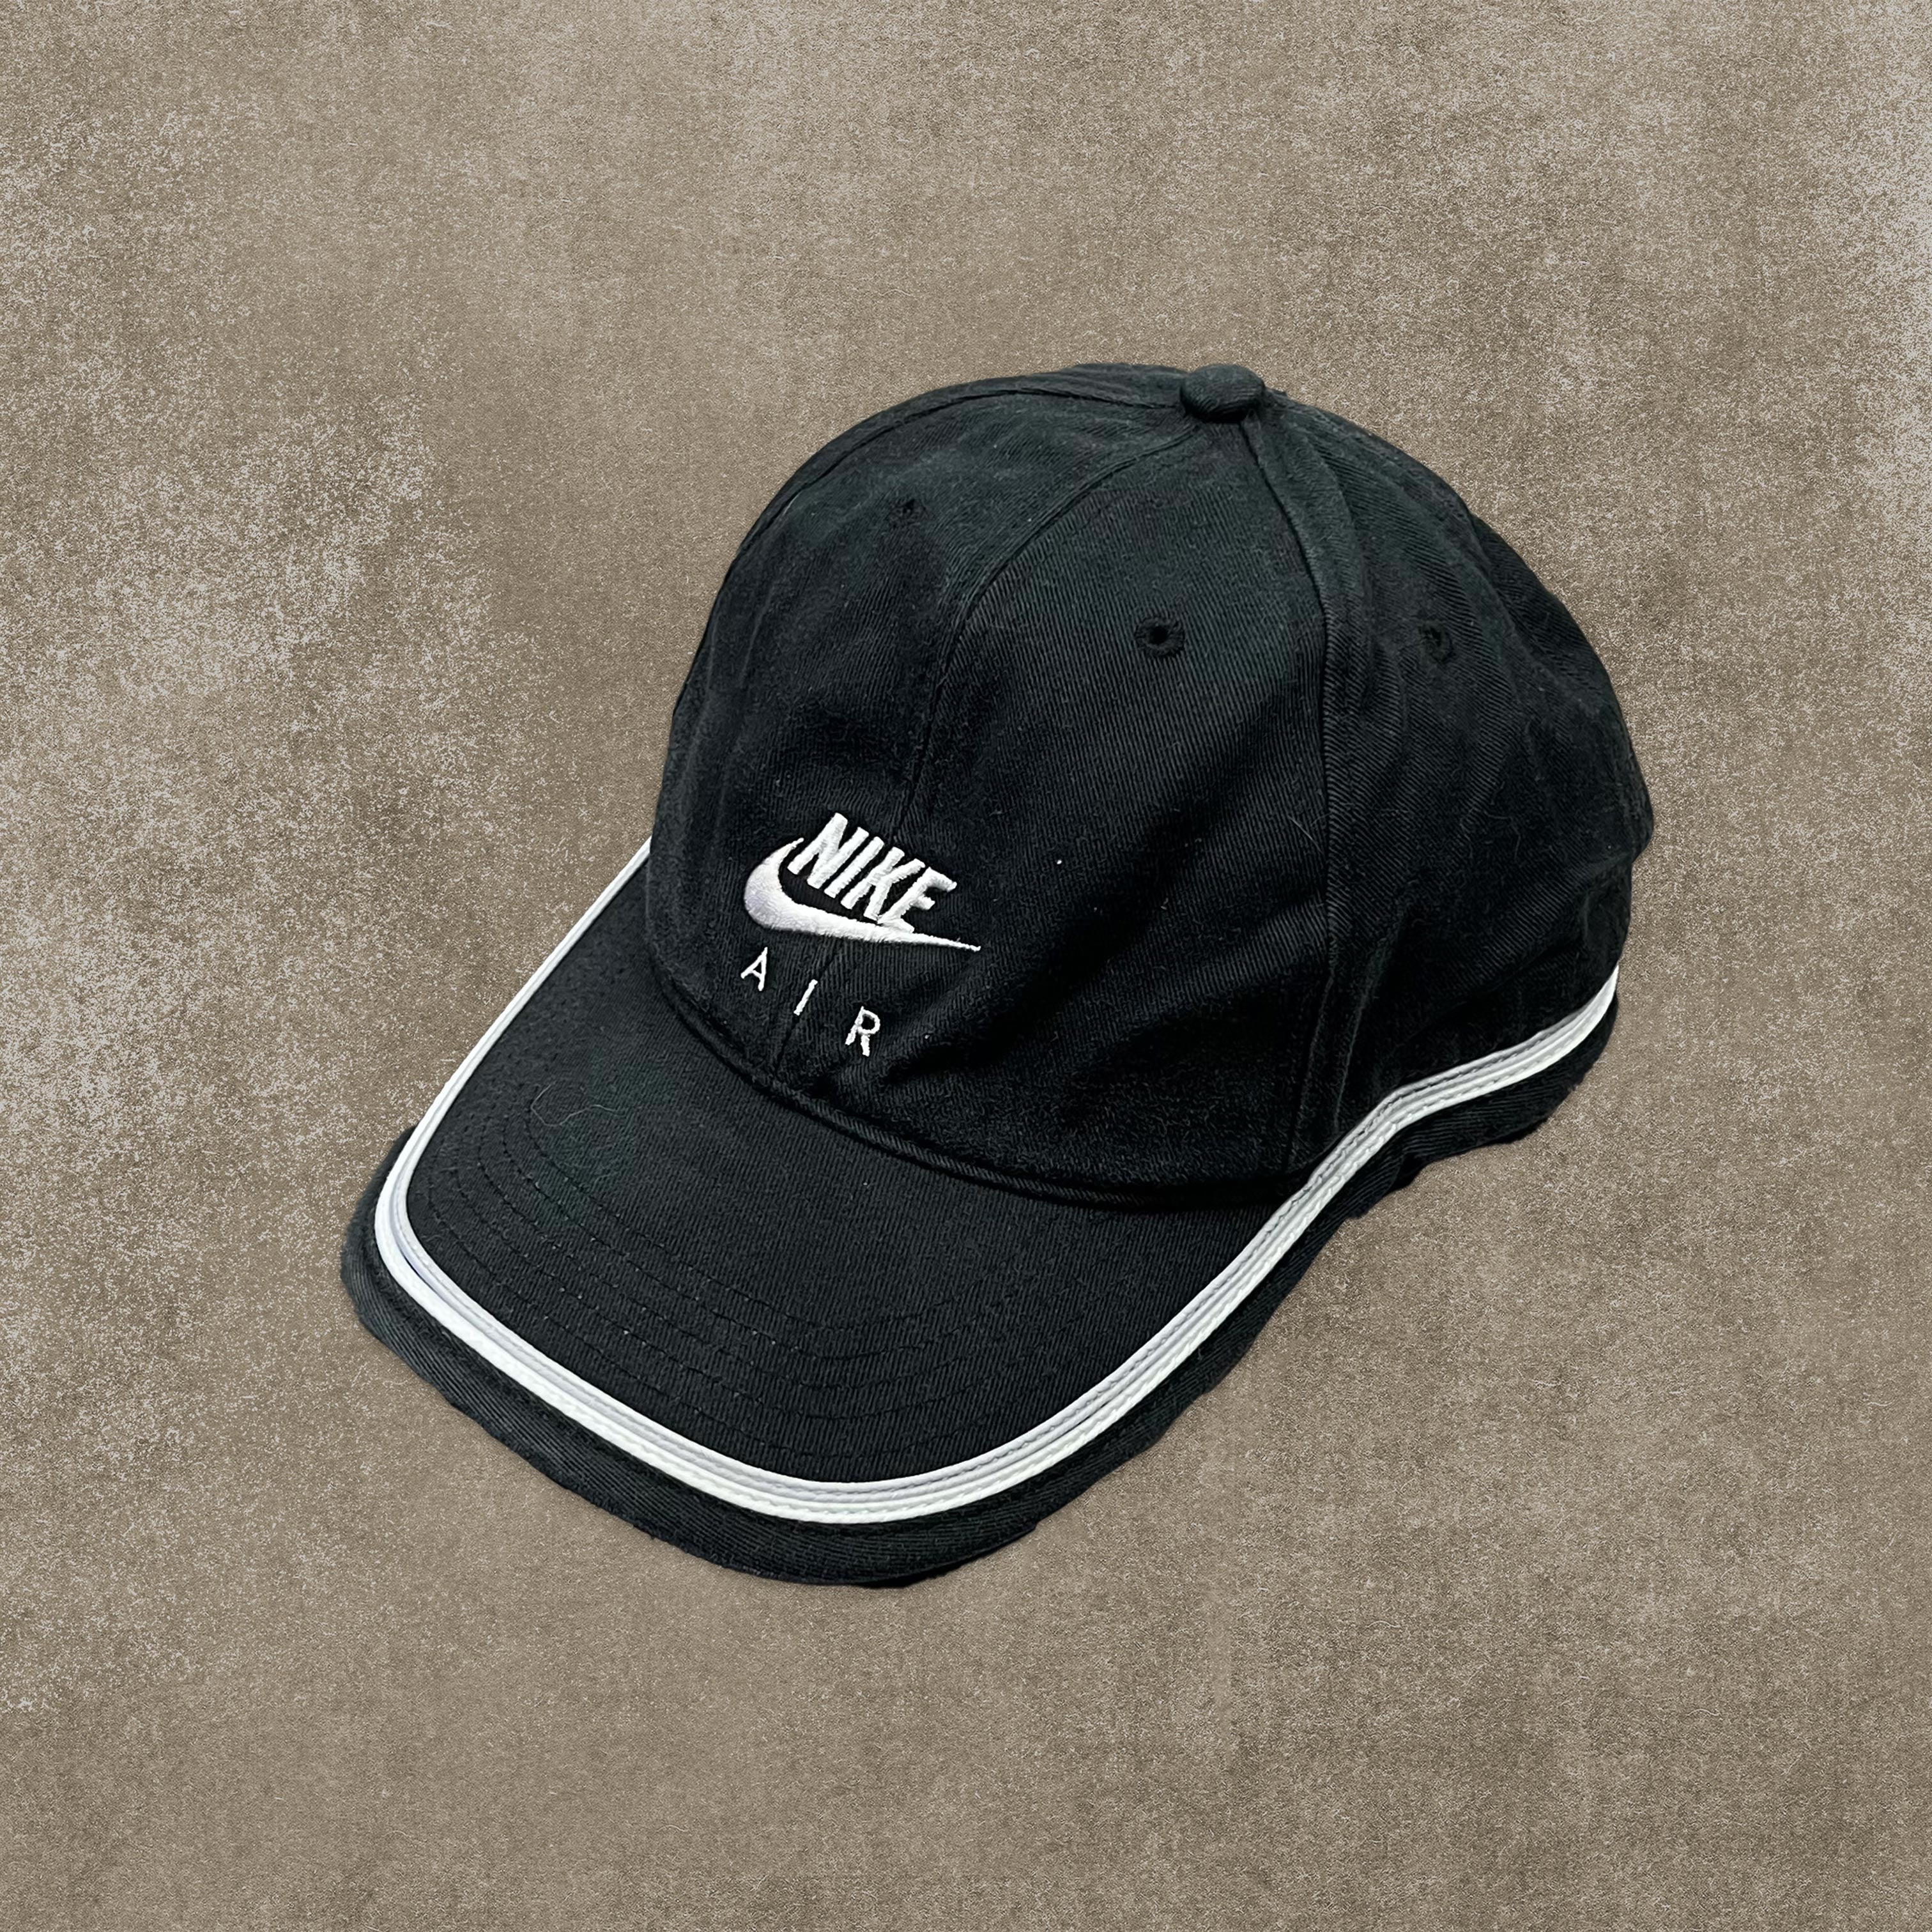 Nike Air RARE Black Embroidered Spell Out Cap